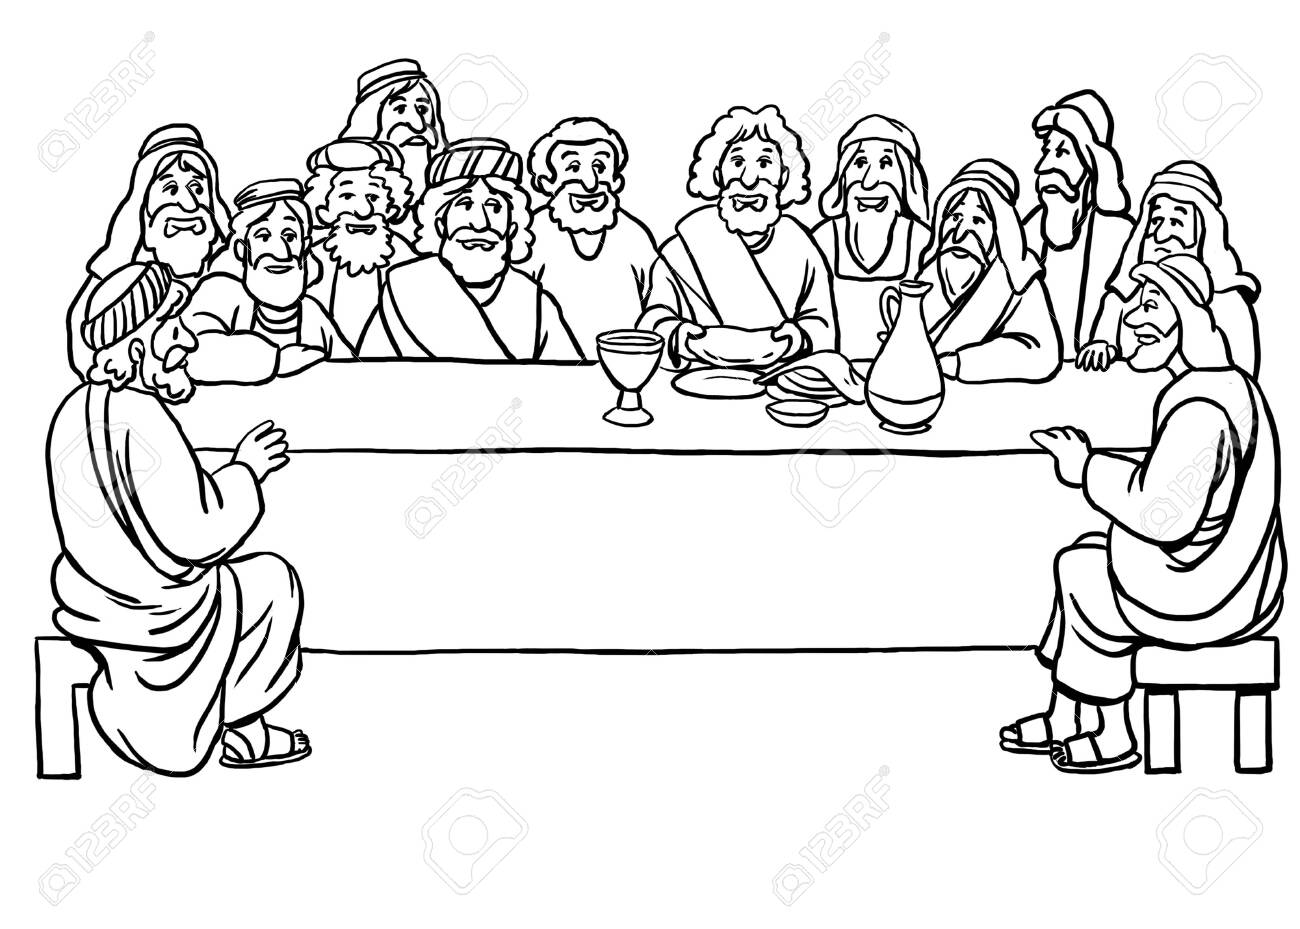 Coloring page of the last supper stock photo picture and royalty free image image